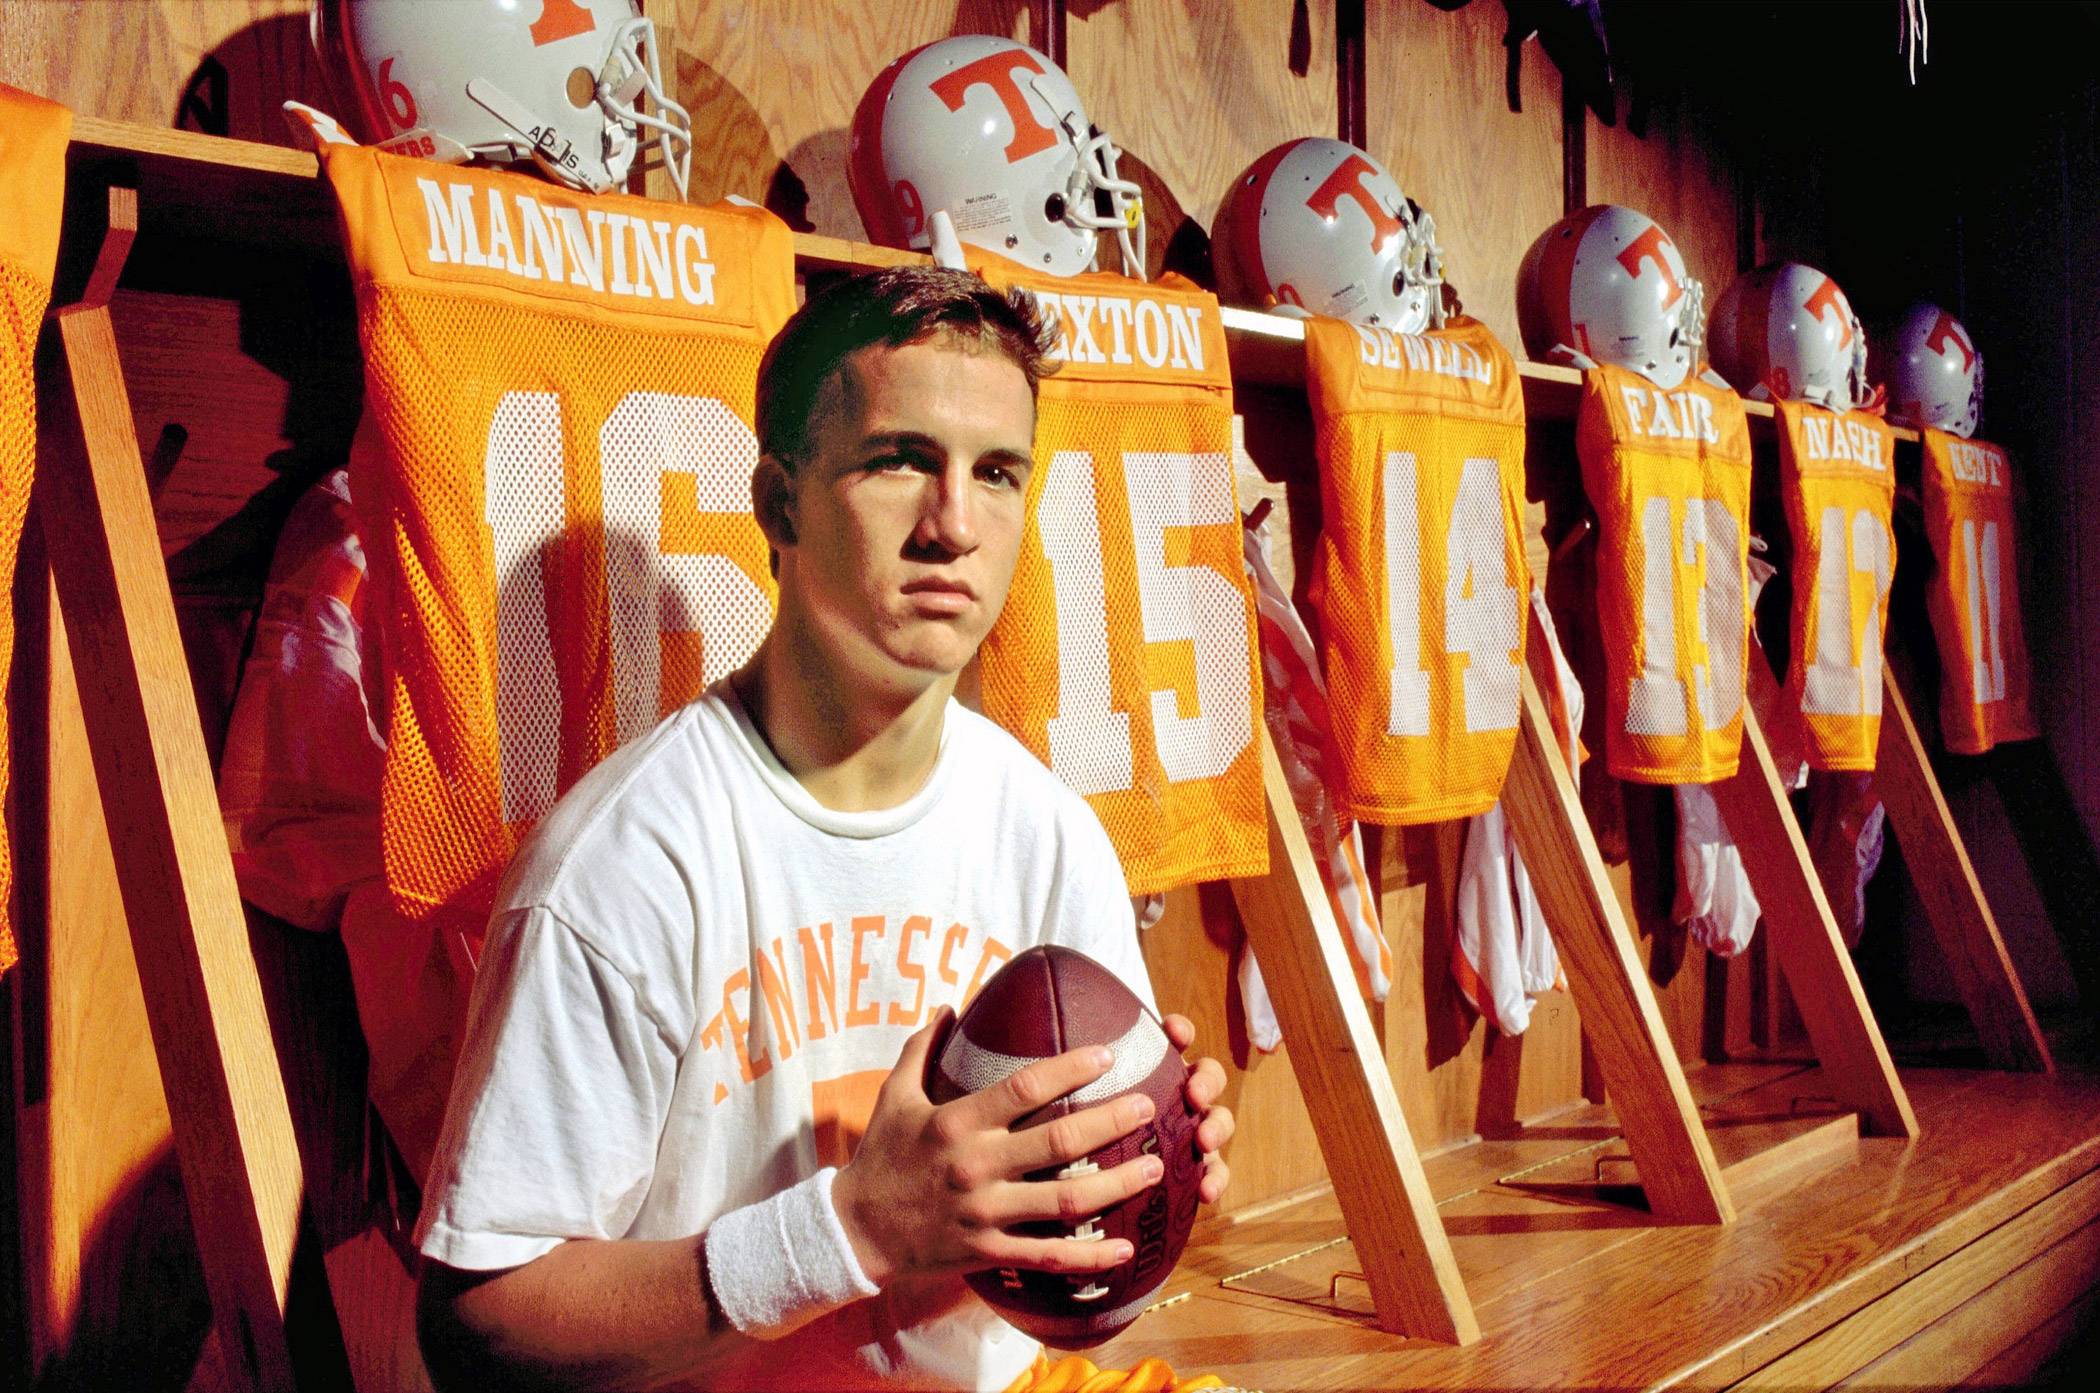 Peyton Manning played quarterback in college football with the Tennessee Volunteers, seen here in the locker room circa 1995 in Knoxville, Tenn.